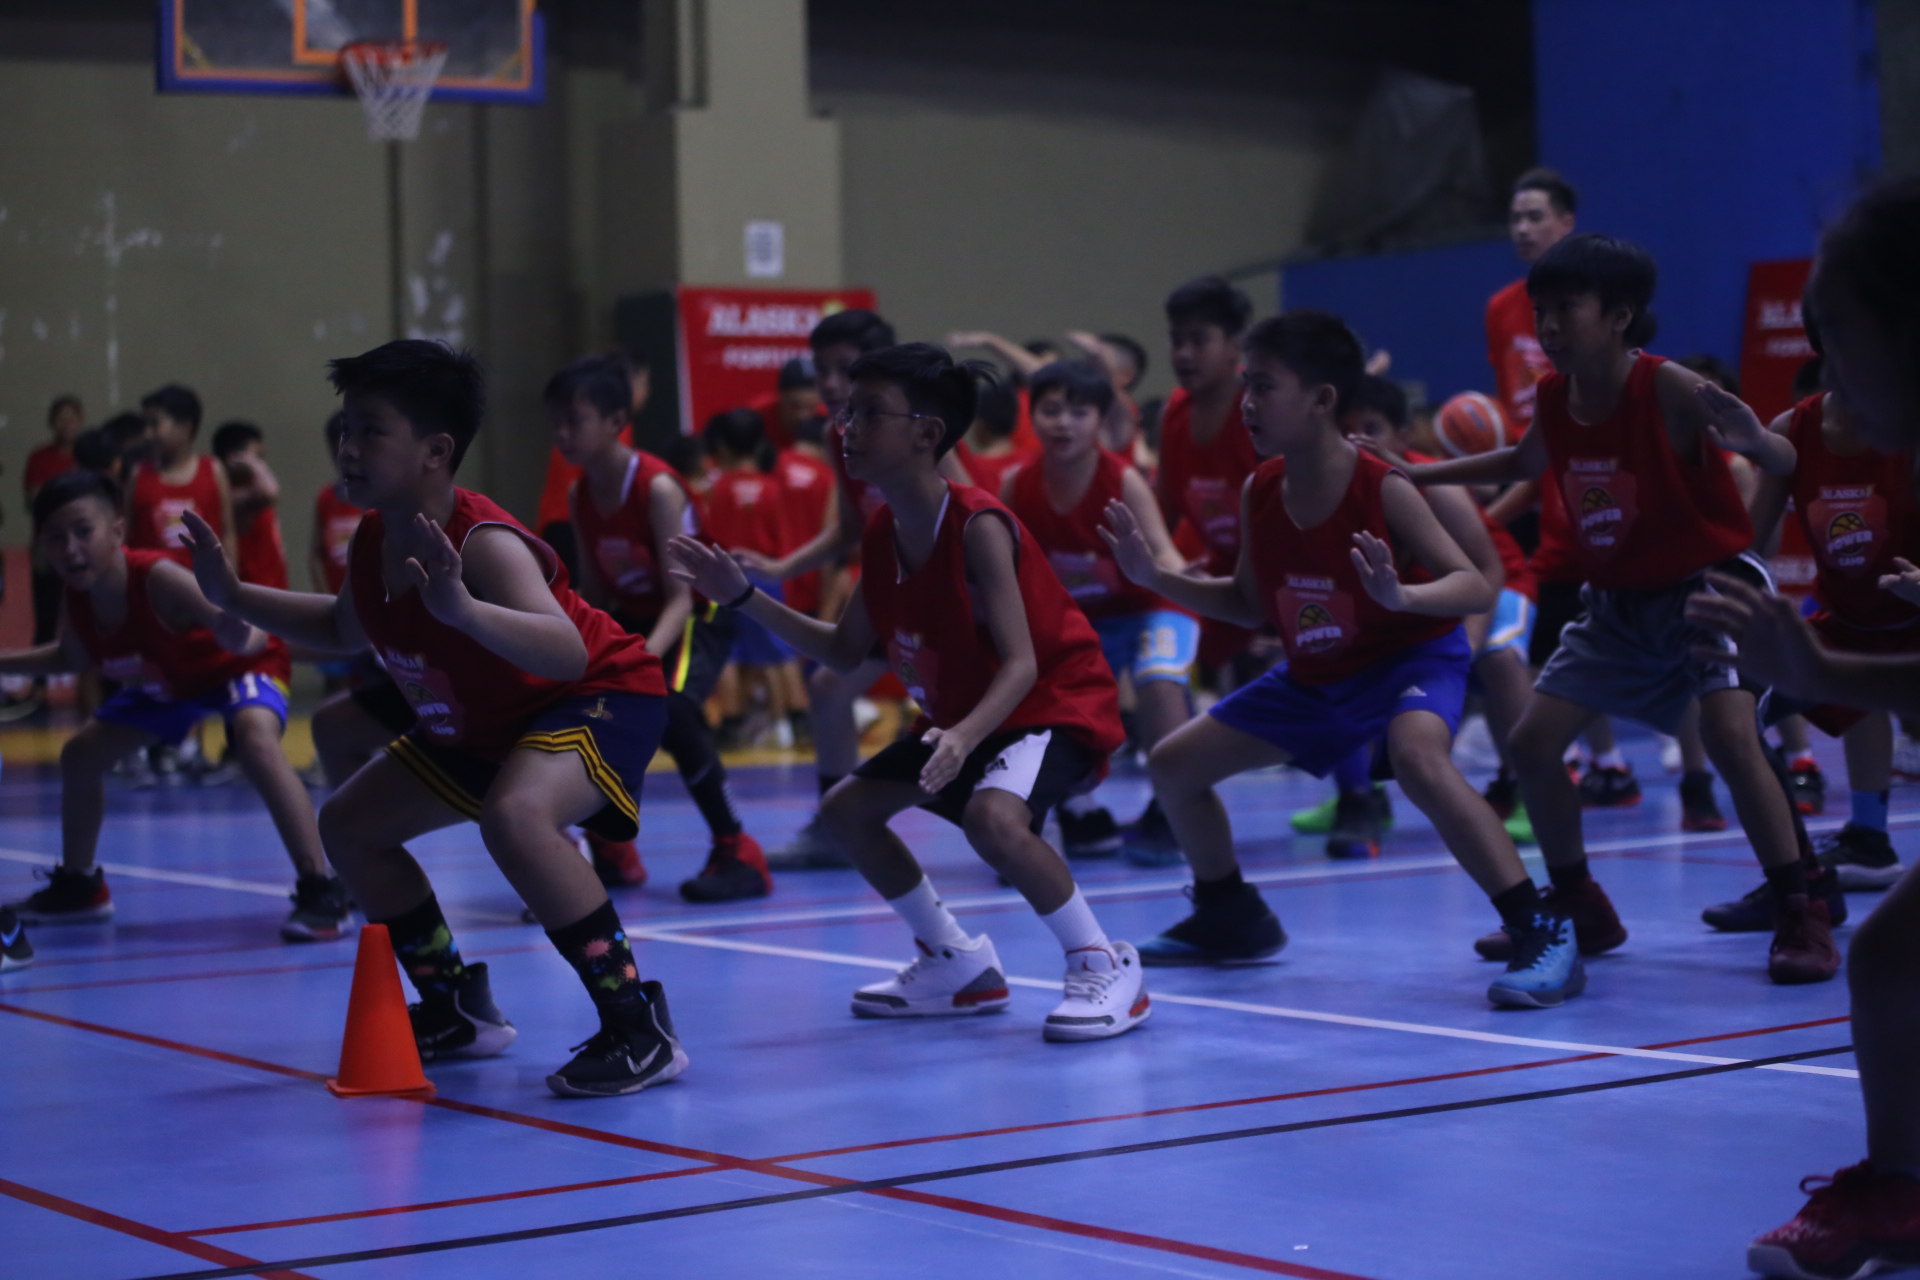 The Alaska Basketball Power Camp hosted over 251 participants